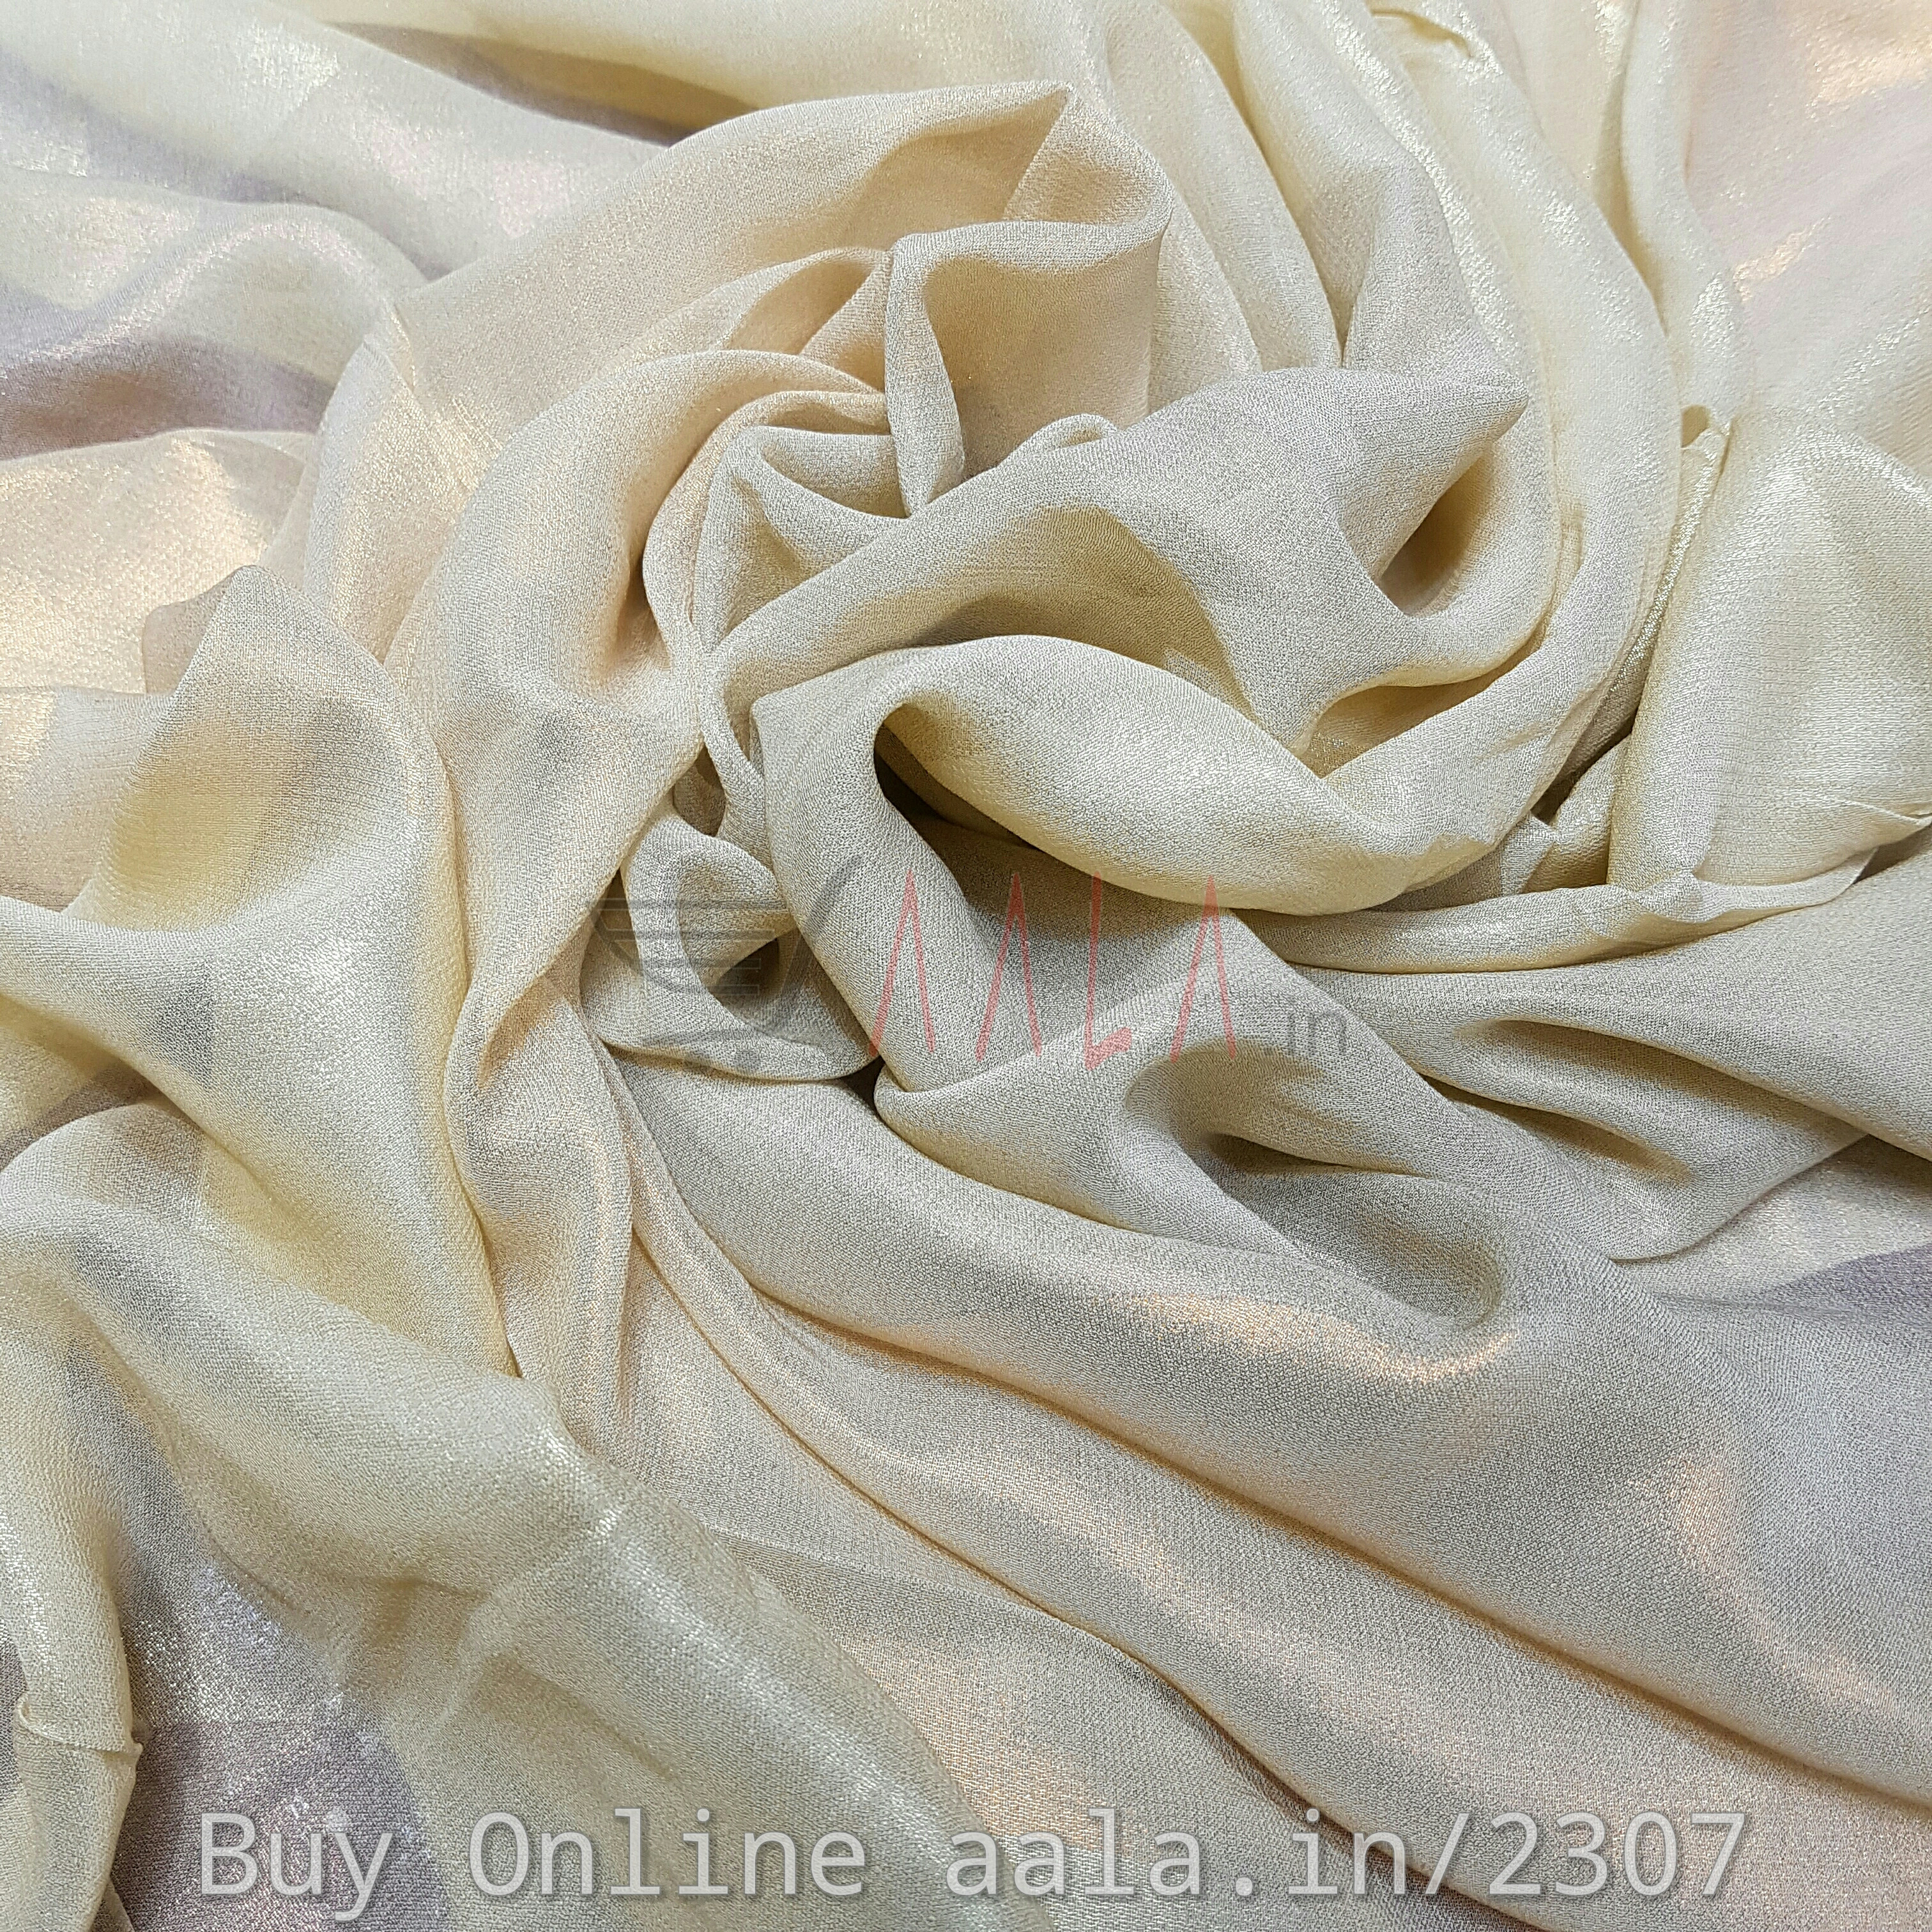 Foil Shaded Georgette Viscose 44 Inches Dyed Per Metre #2307